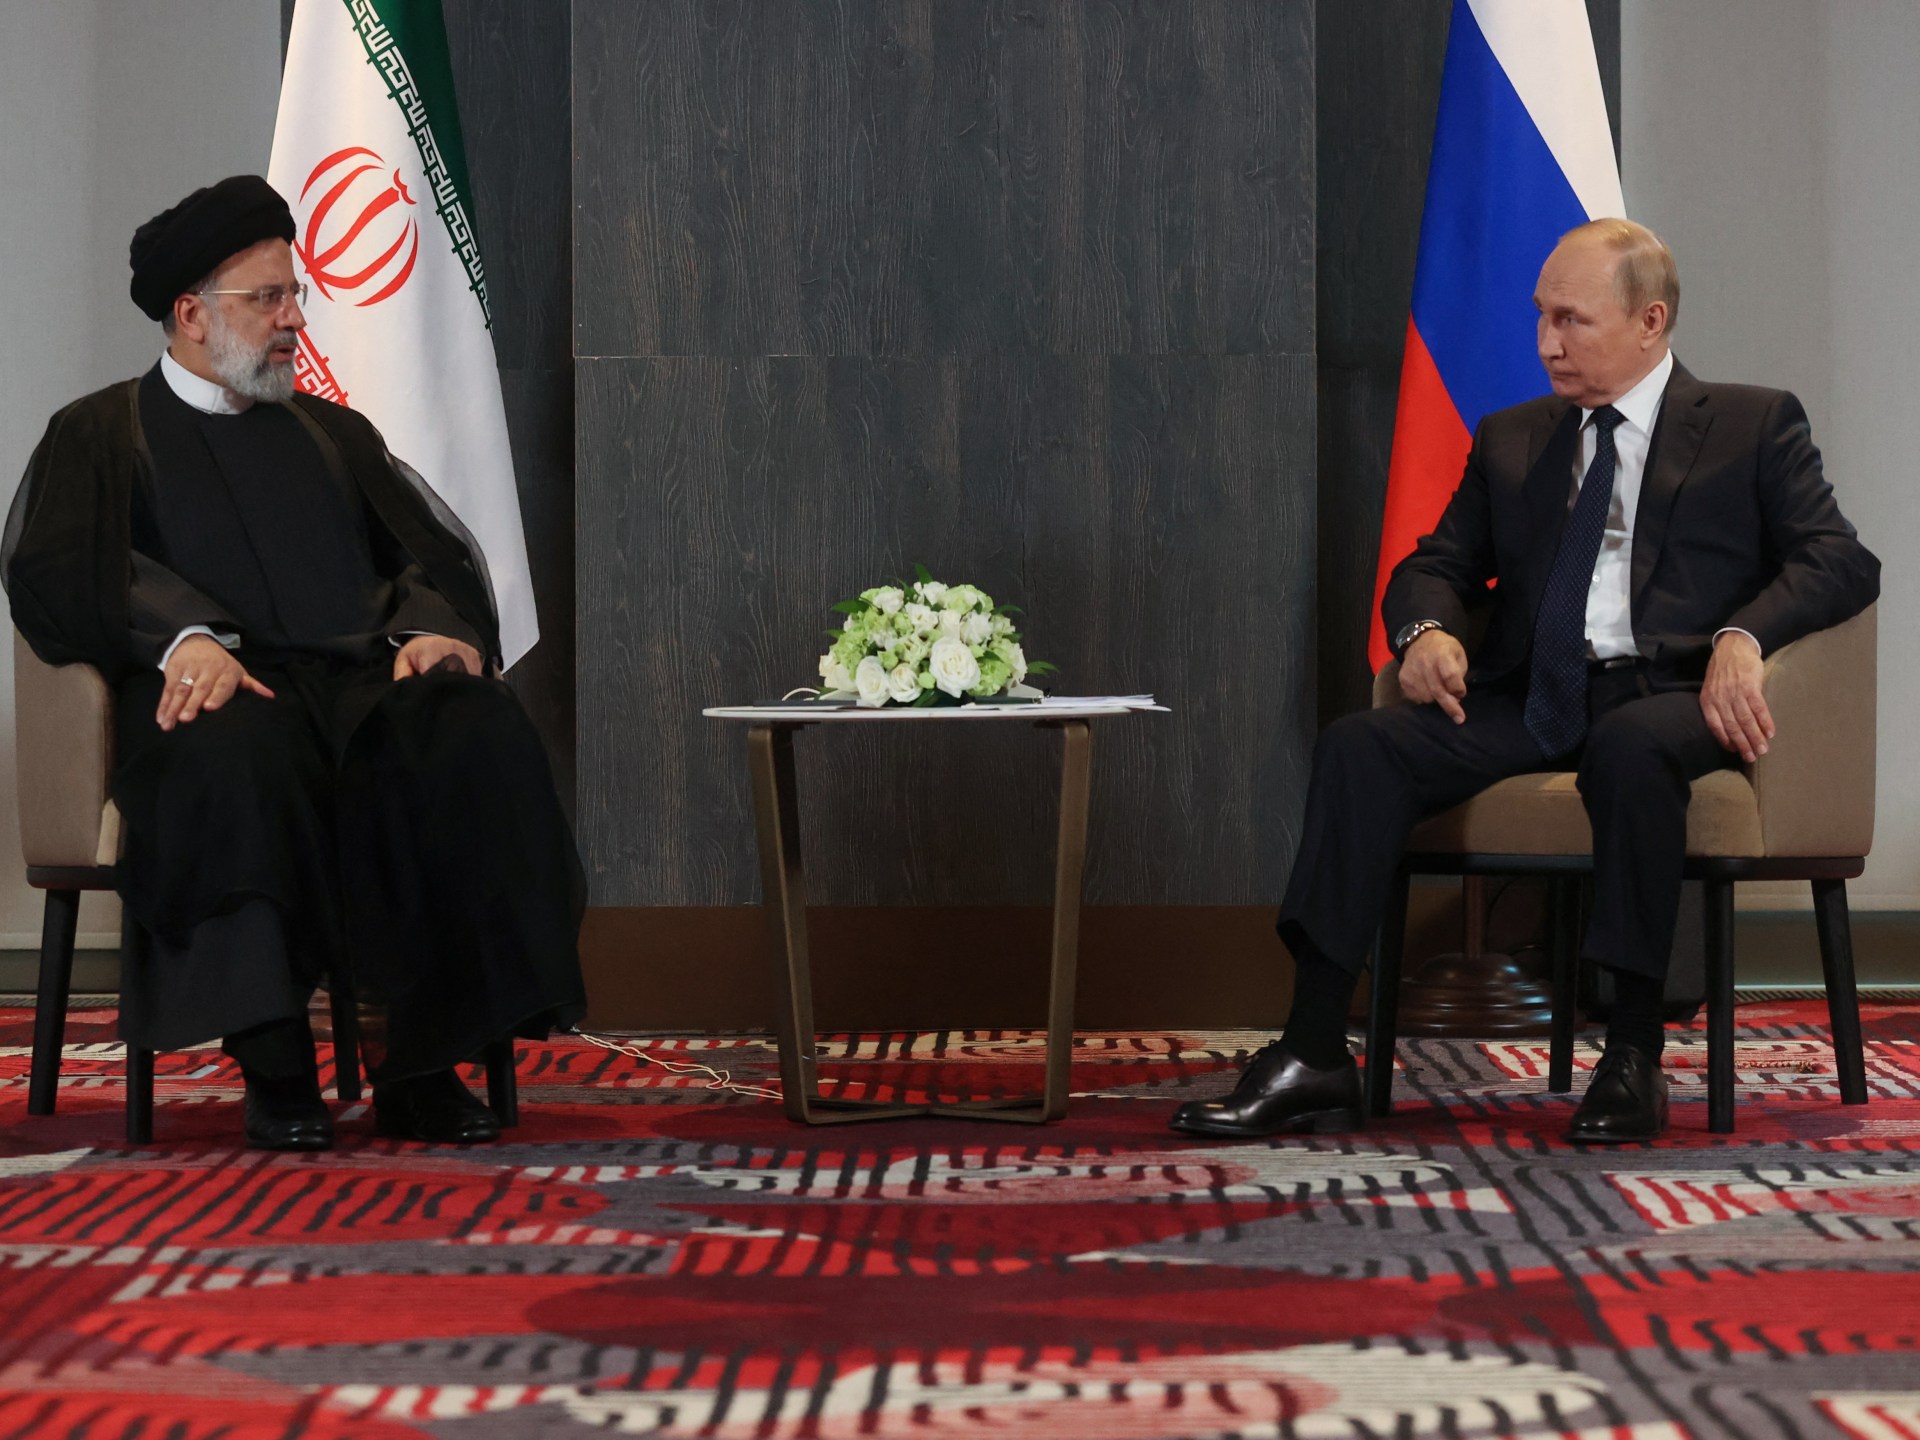 Iran’s Raisi says ‘genocide’ under way in Gaza as he meets Russia’s Putin | Israel-Palestine conflict News